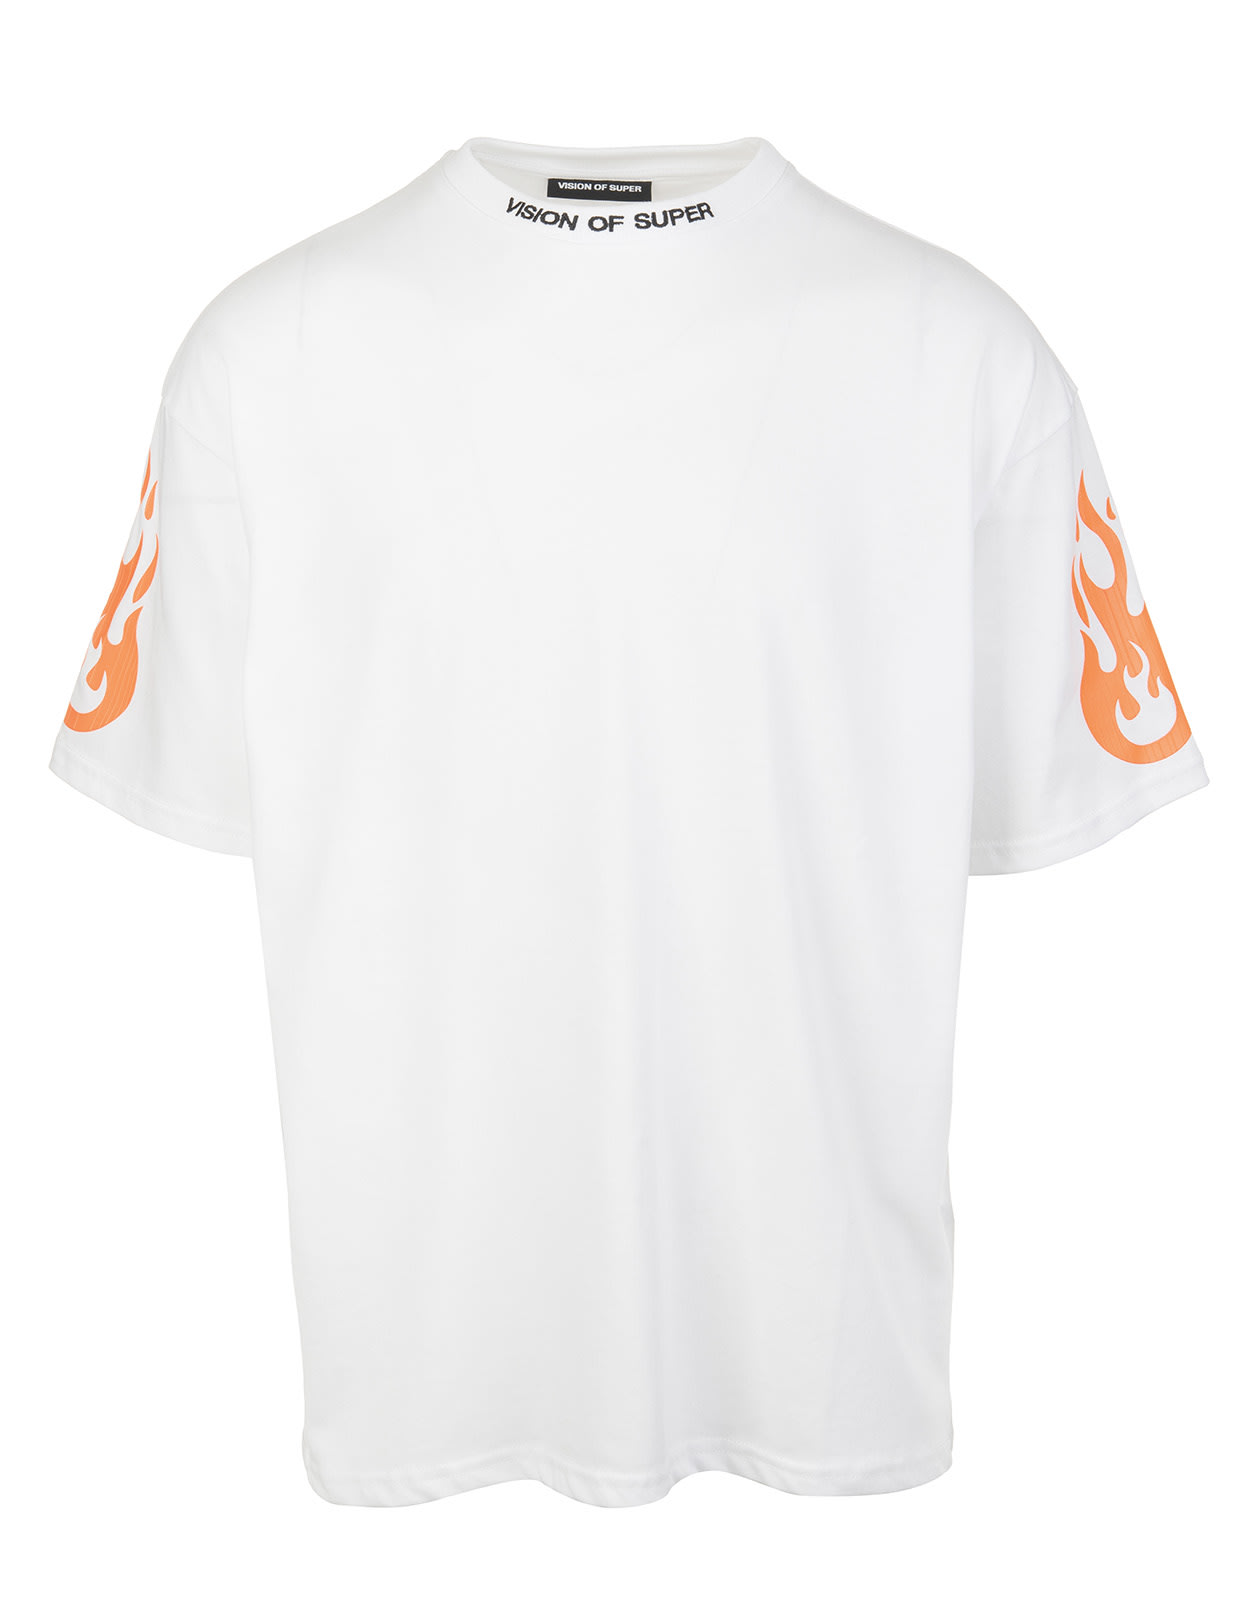 Vision of Super Man White T-shirt With Orange Flame